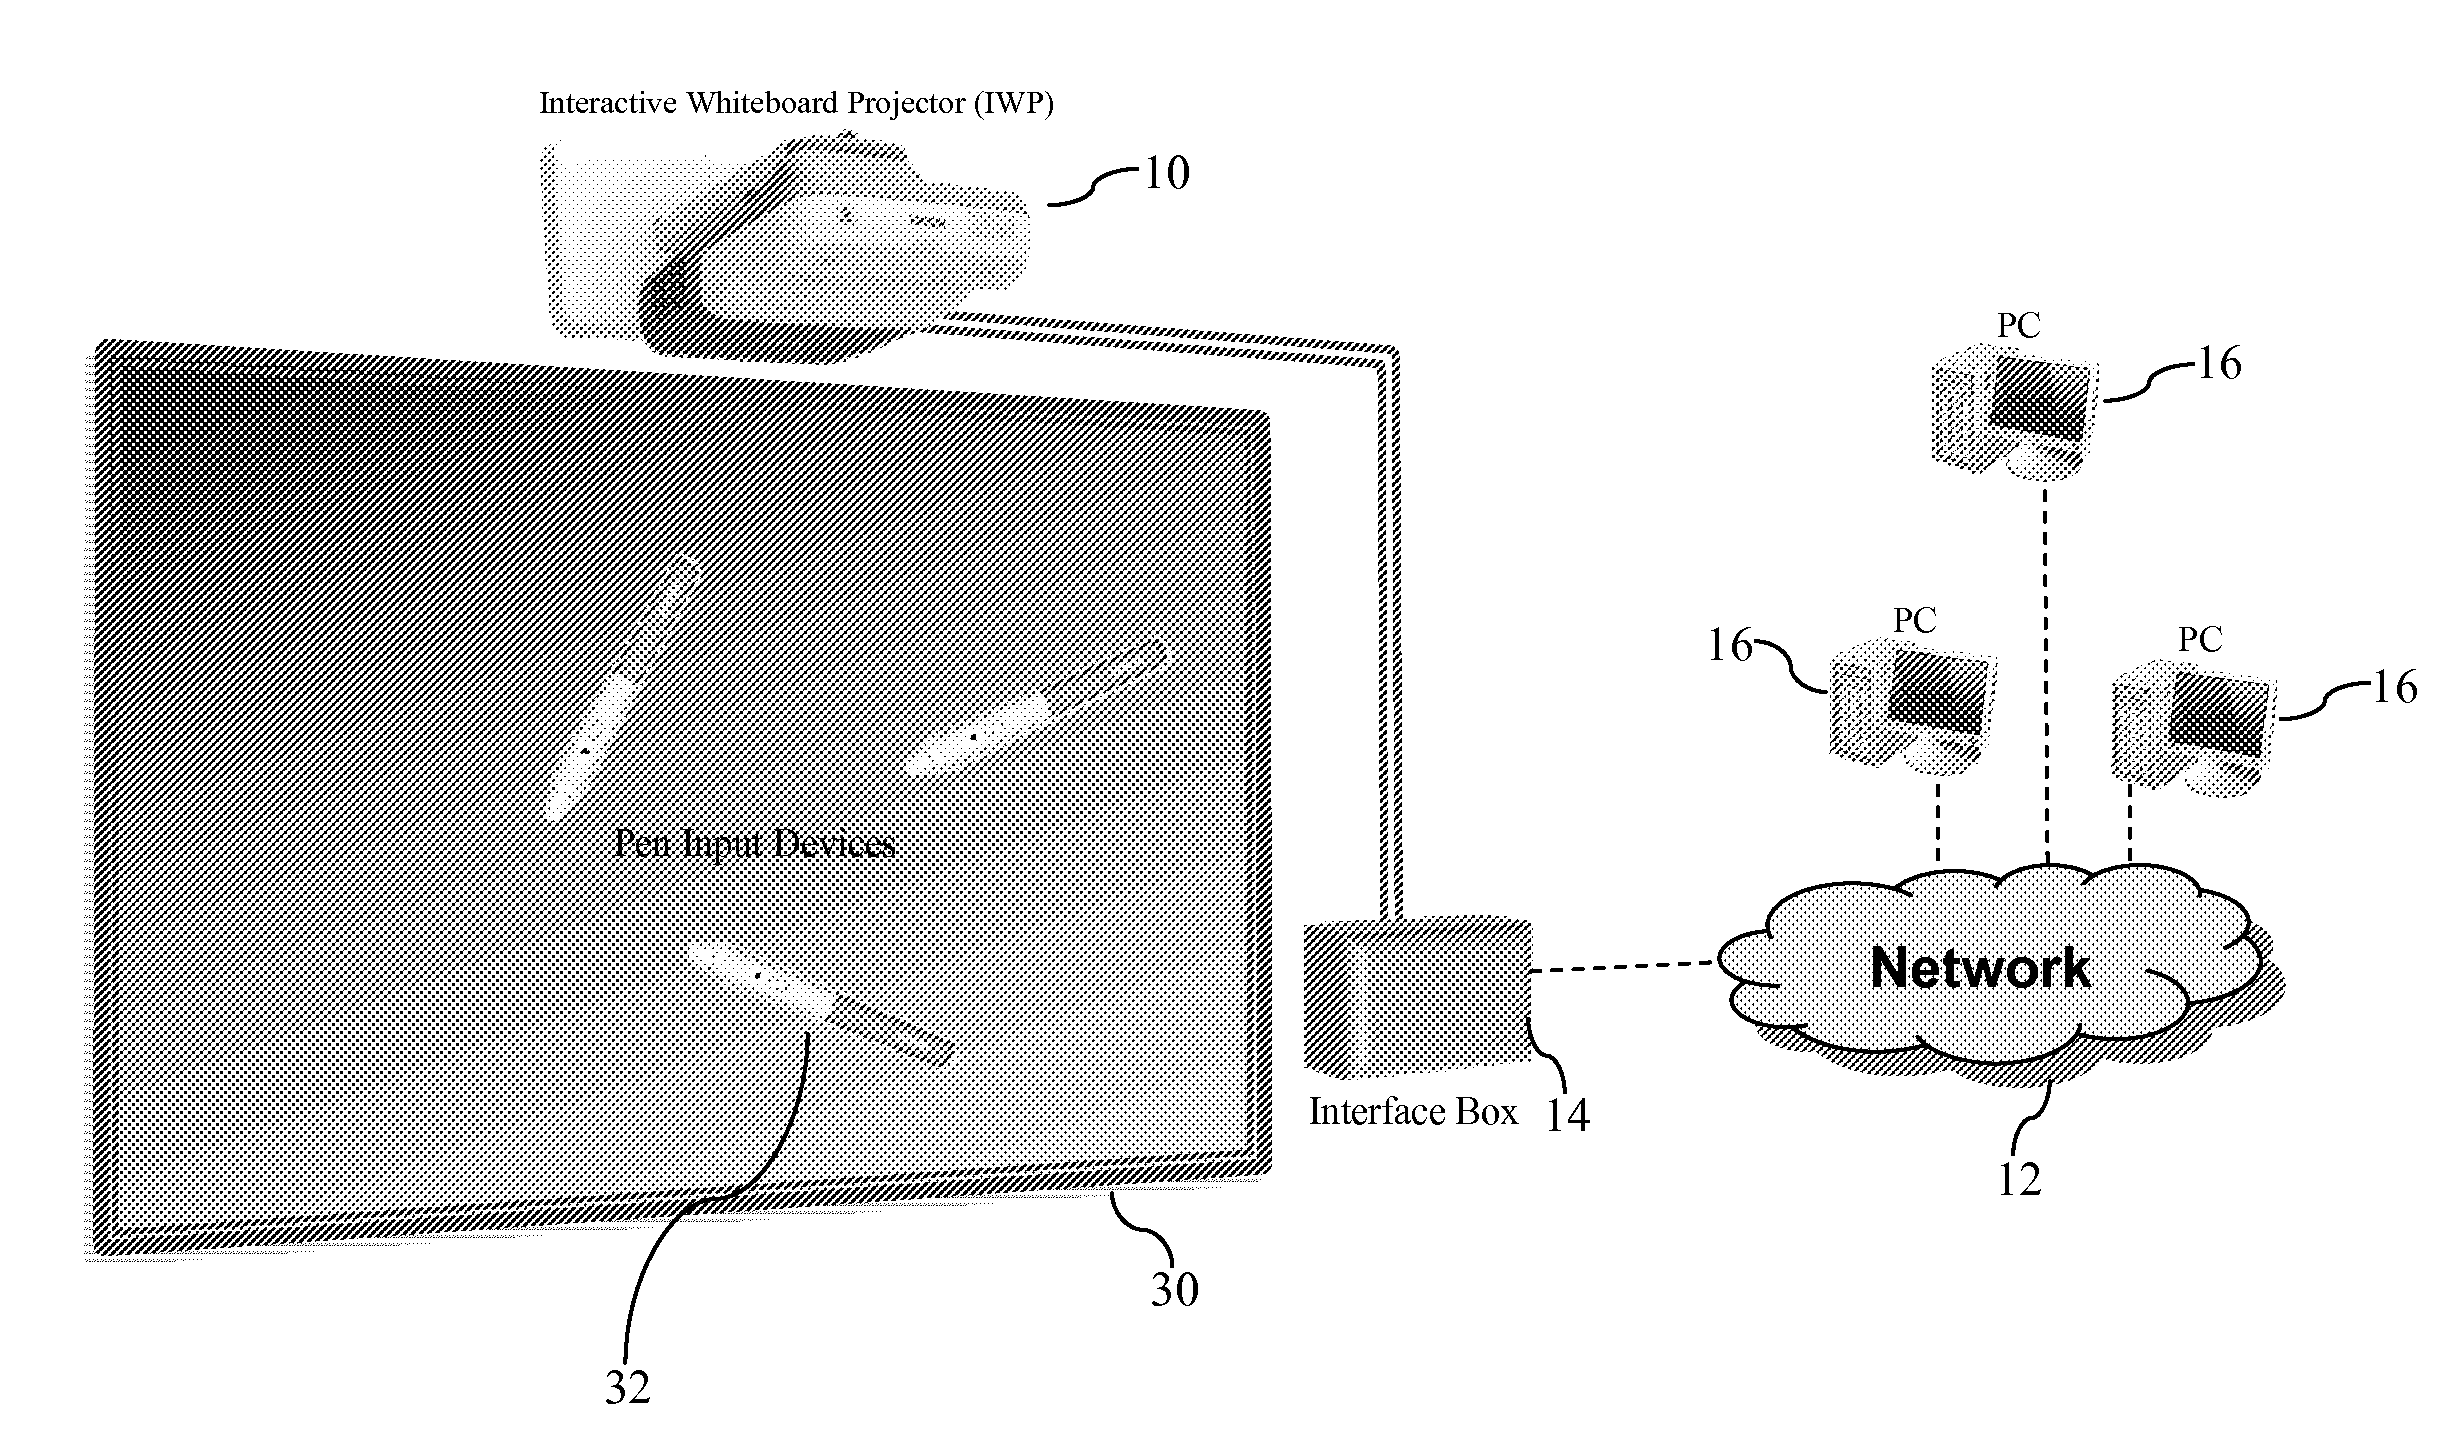 Method for Securely Distributing Meeting Data from Interactive Whiteboard Projector